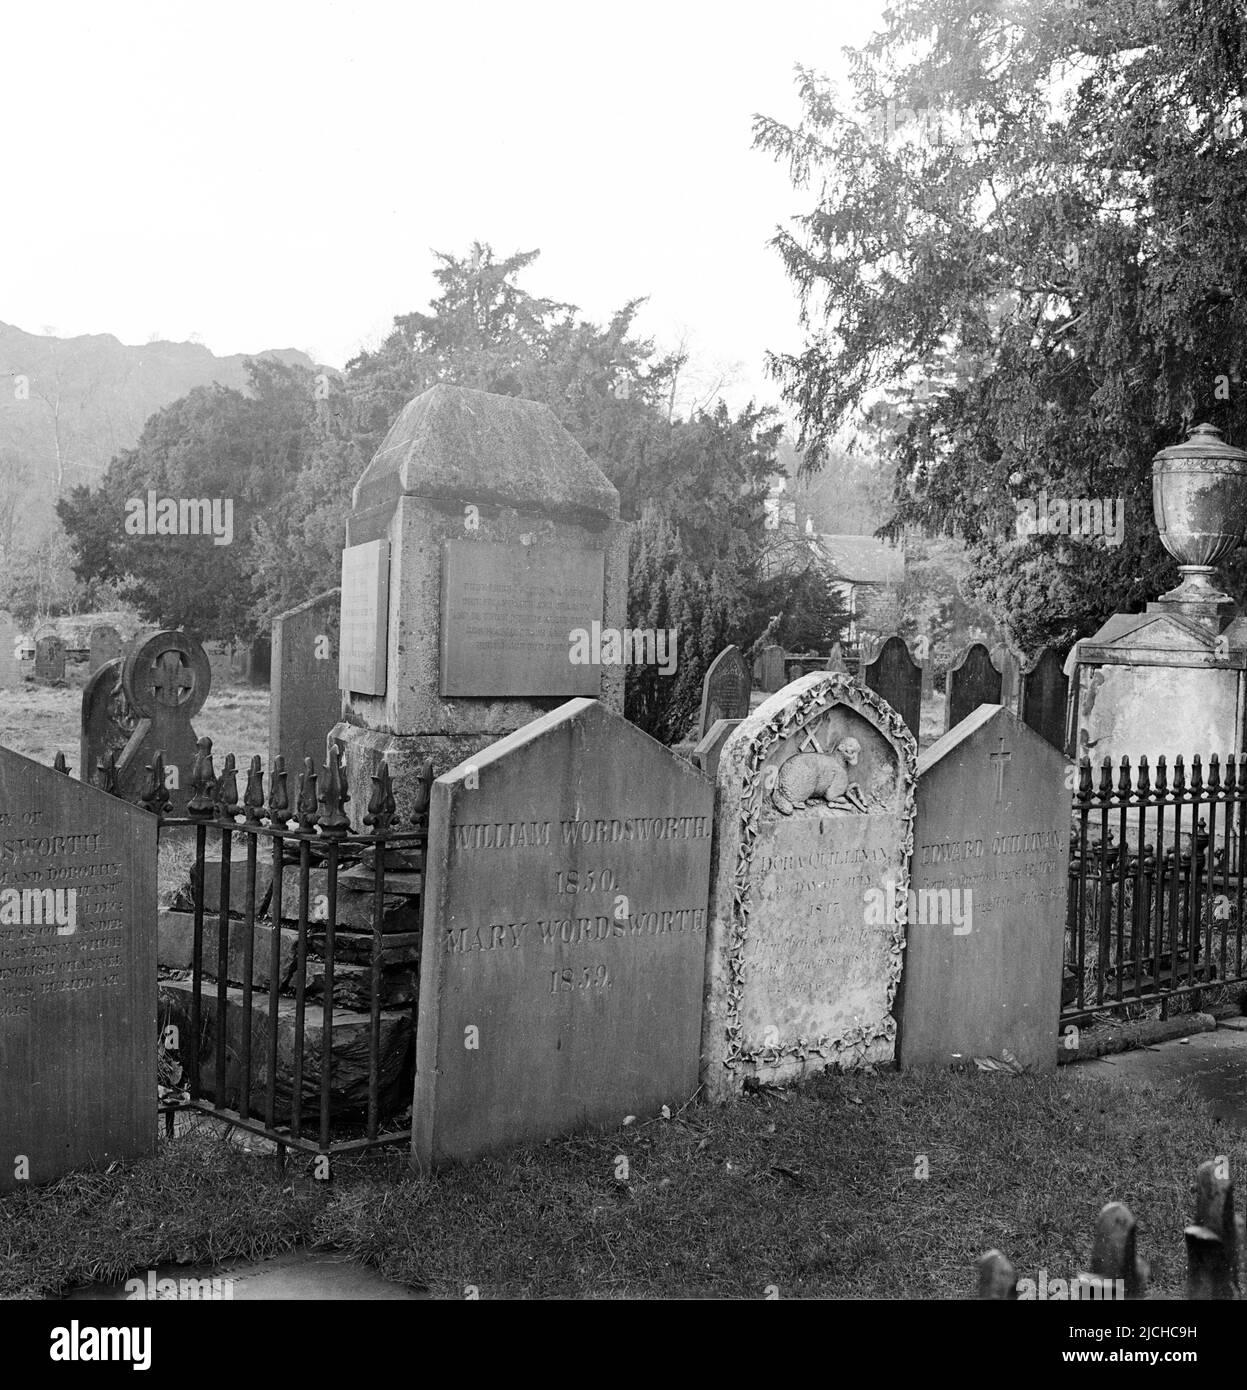 1950s, historical, the gravestone of the romantic English poet, William Wordsworth, at St Oswald's Church, Grasmere, Cumbria, England, UK. Born in 1770, he was appointed as the Poet Laureate of the UK in 1843. He died in 1850. Stock Photo